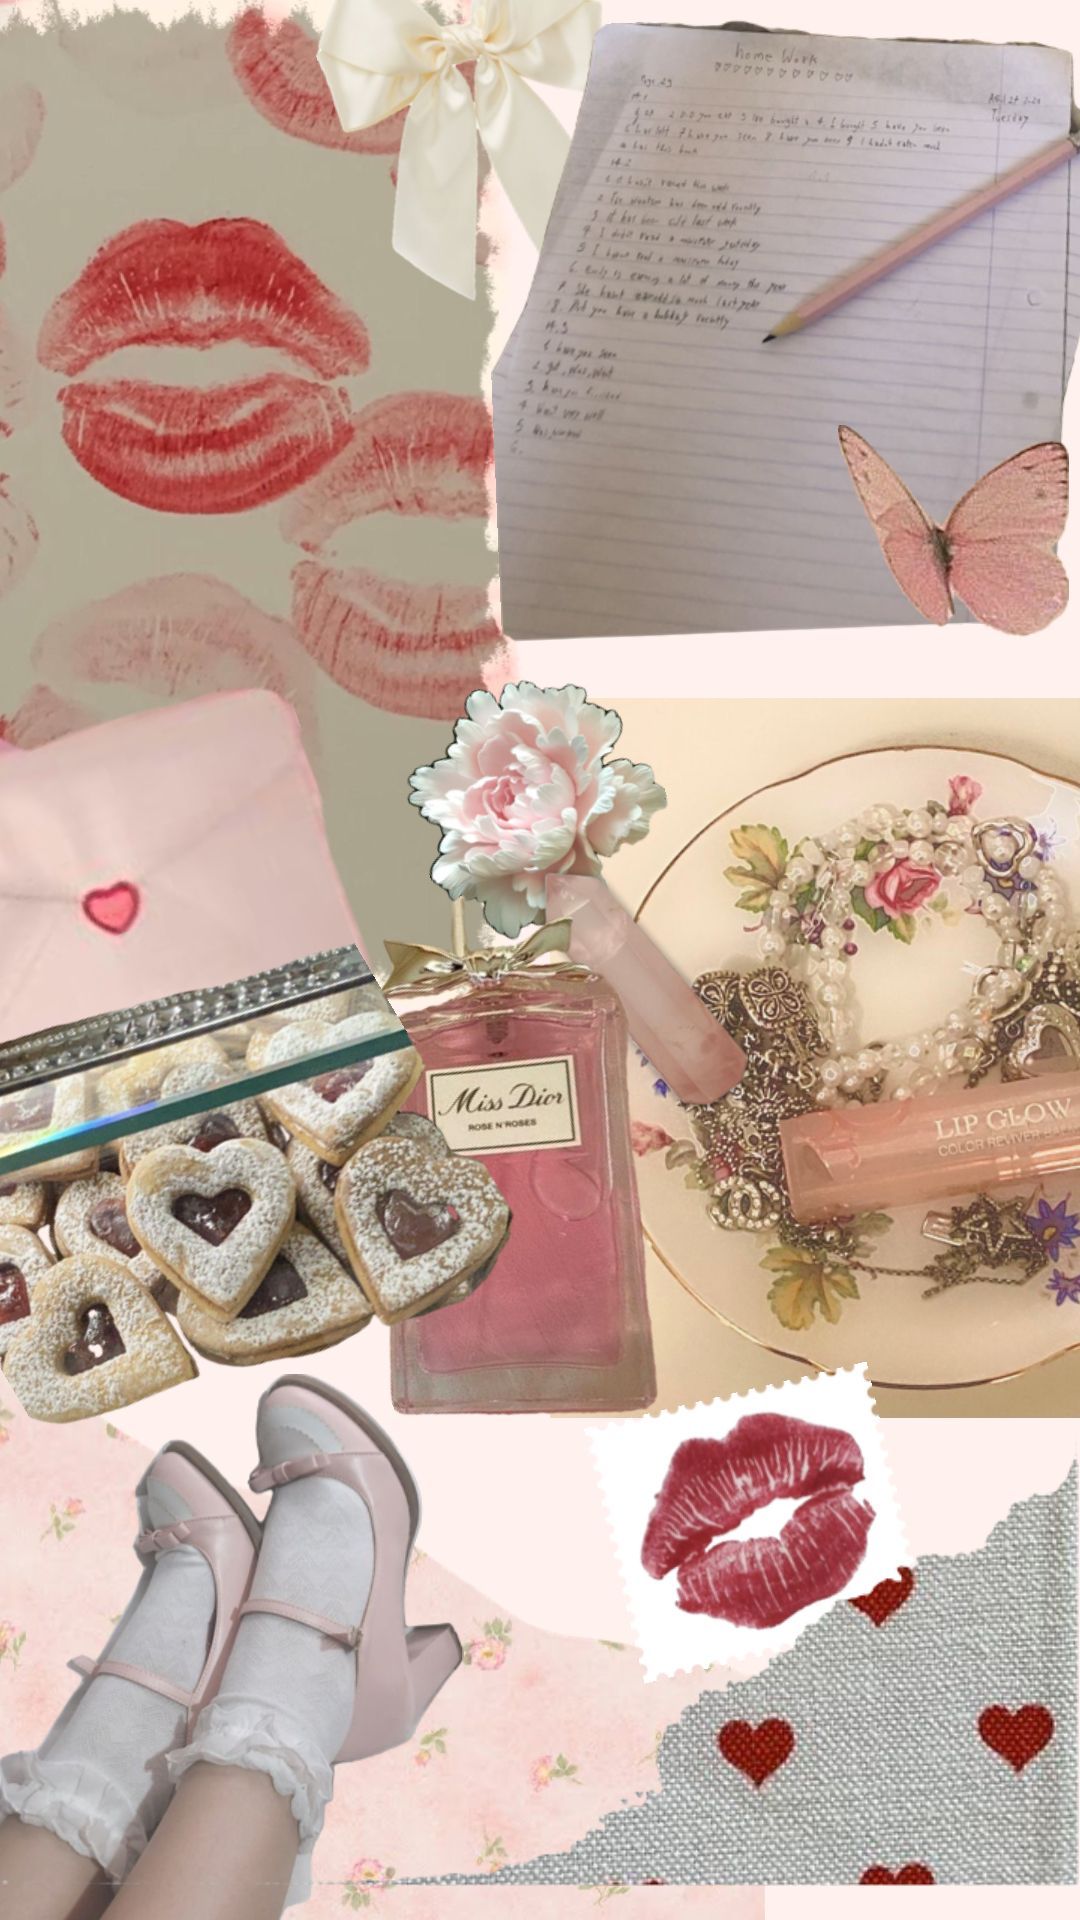 A collage of a pink bottle, butterfly, lips, and other girly items - Coquette